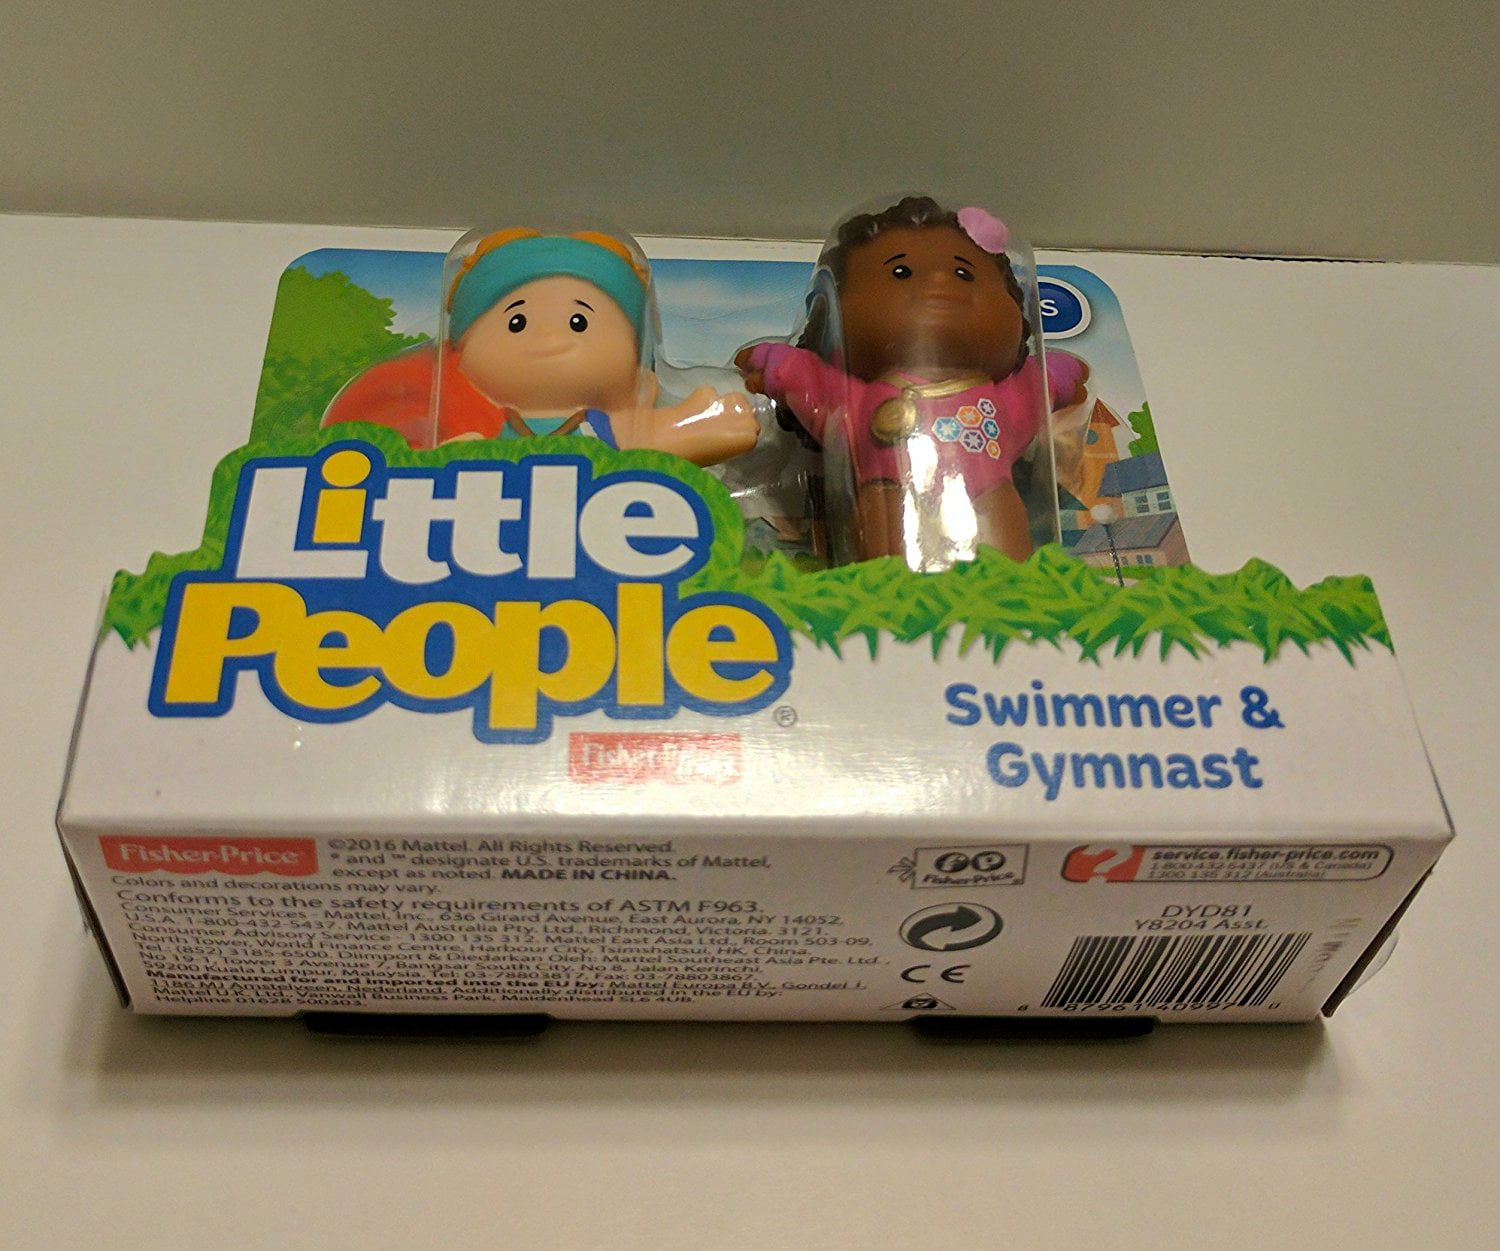 Fisher Little People Swimmer and Gymnast Figures for sale online 